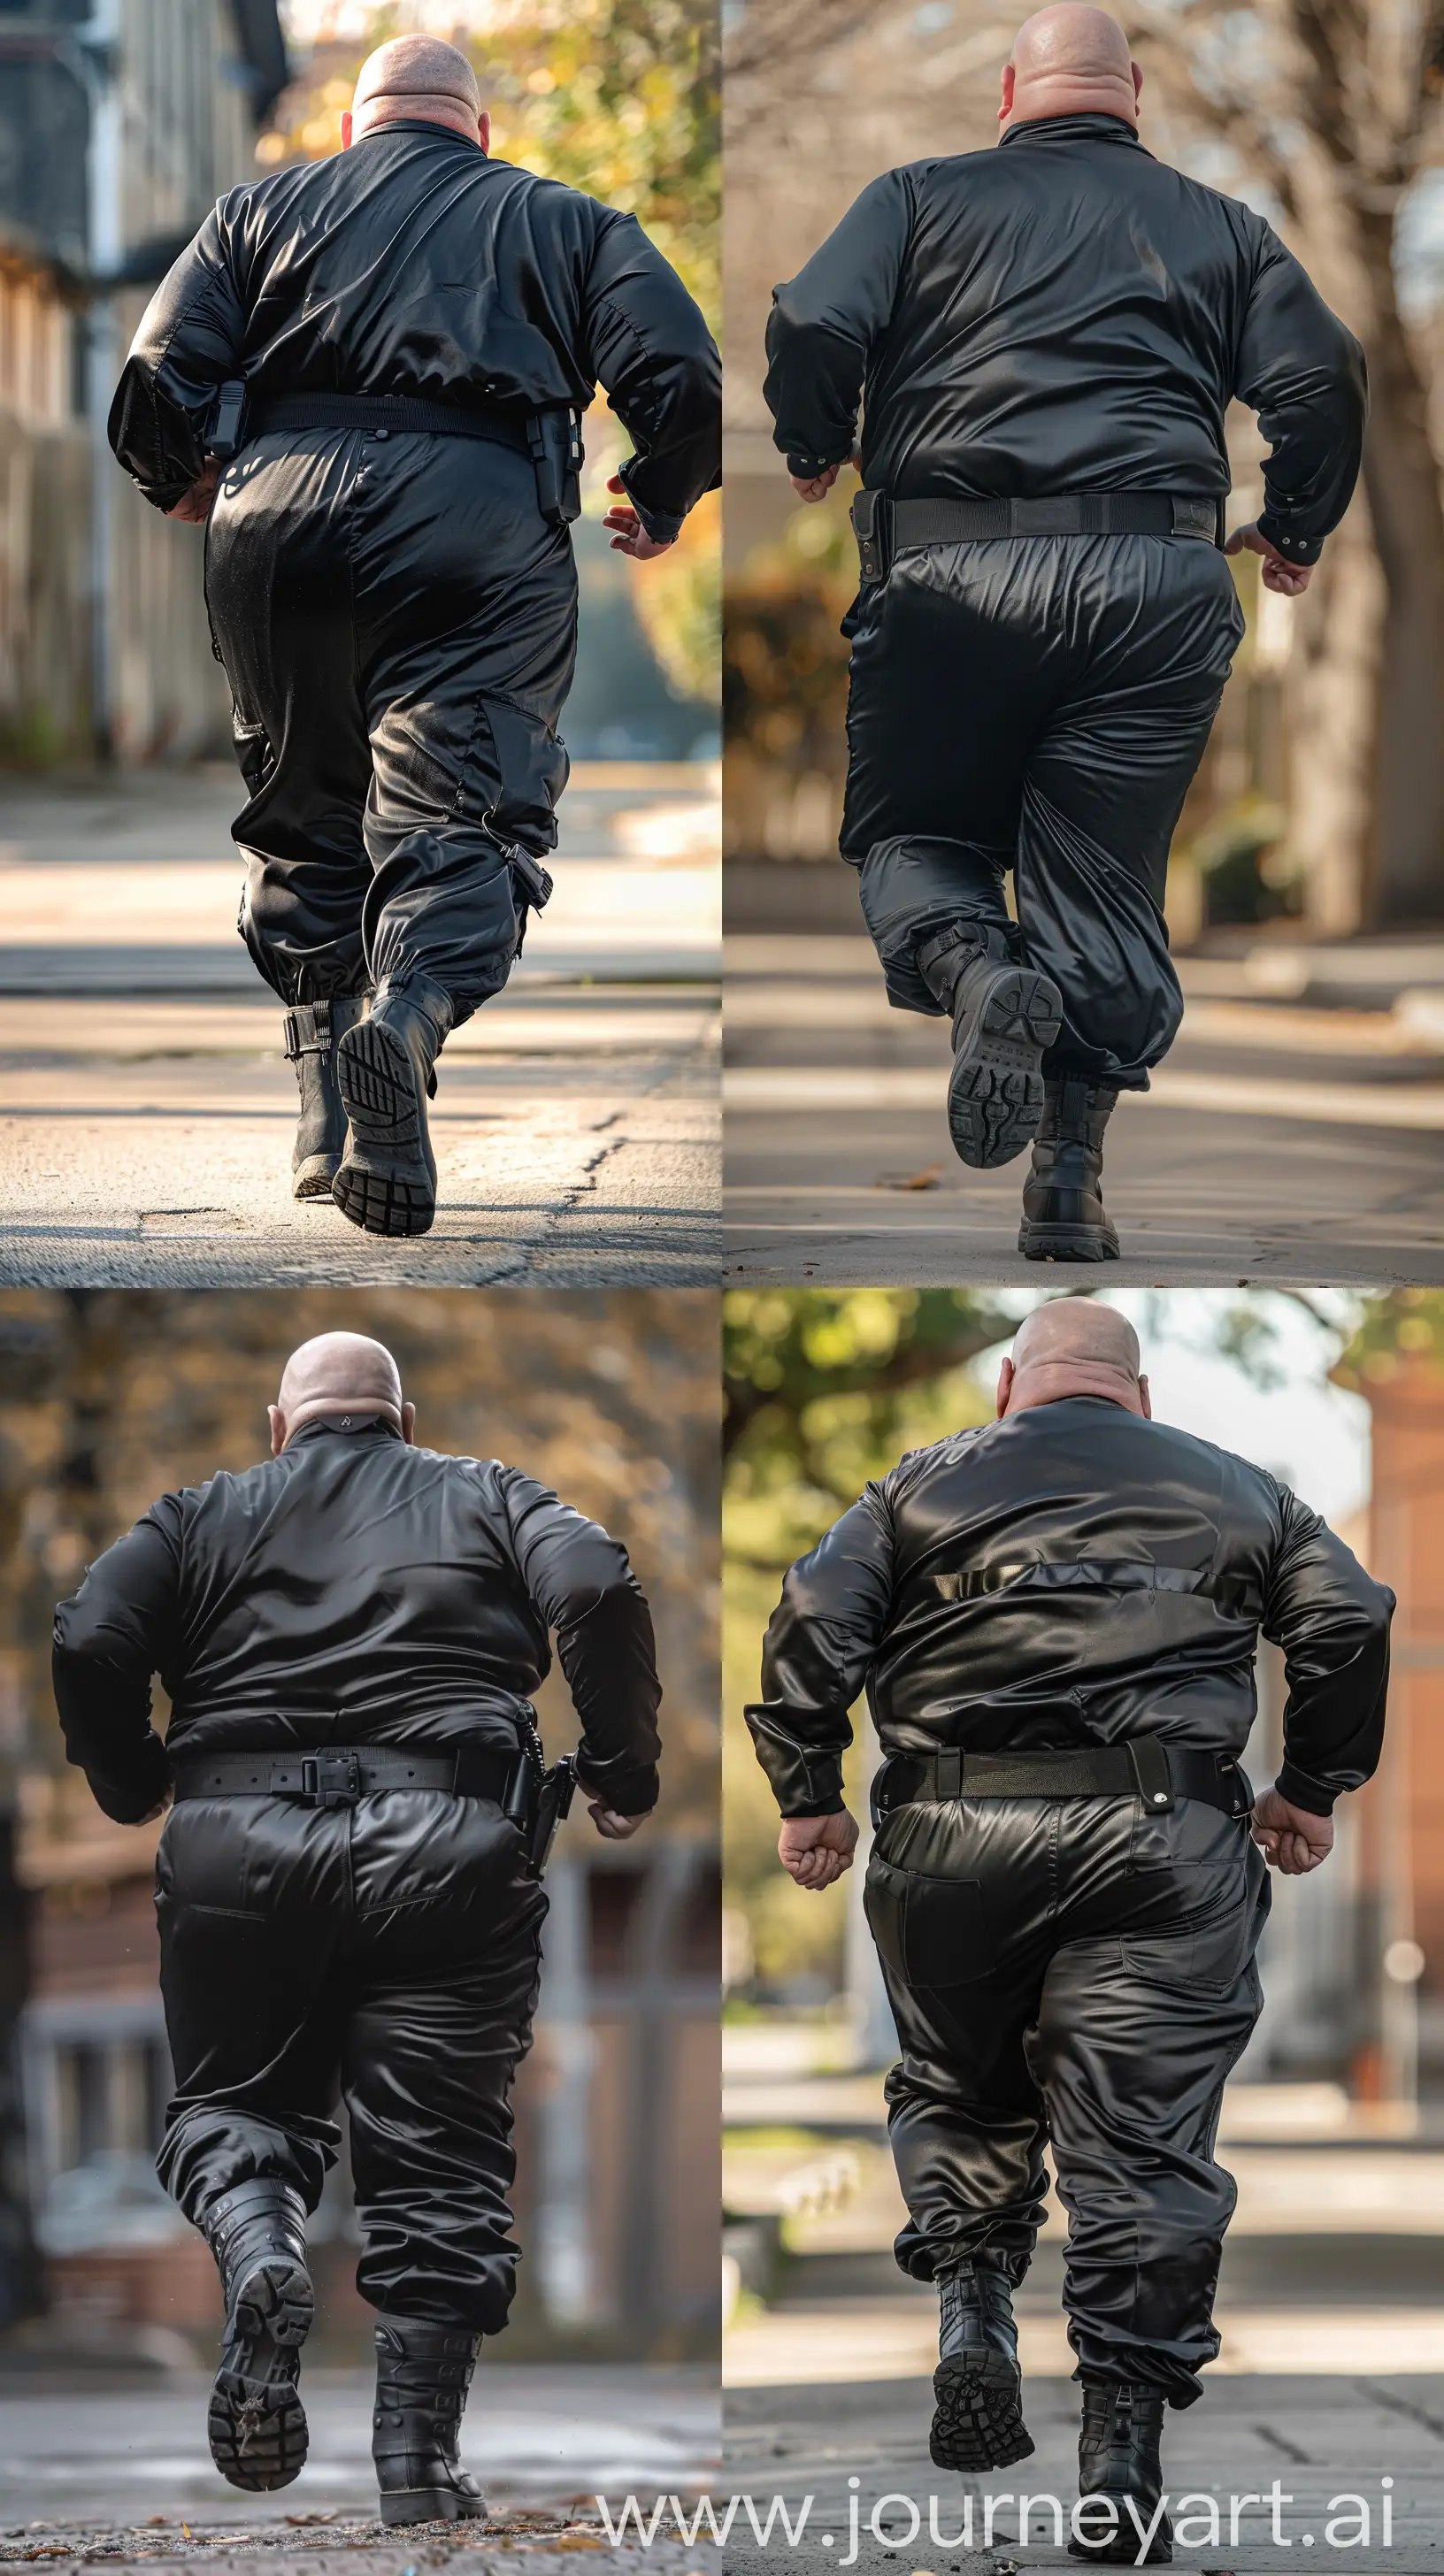 Mature-Security-Guard-Running-Outdoors-in-Black-Tactical-Gear